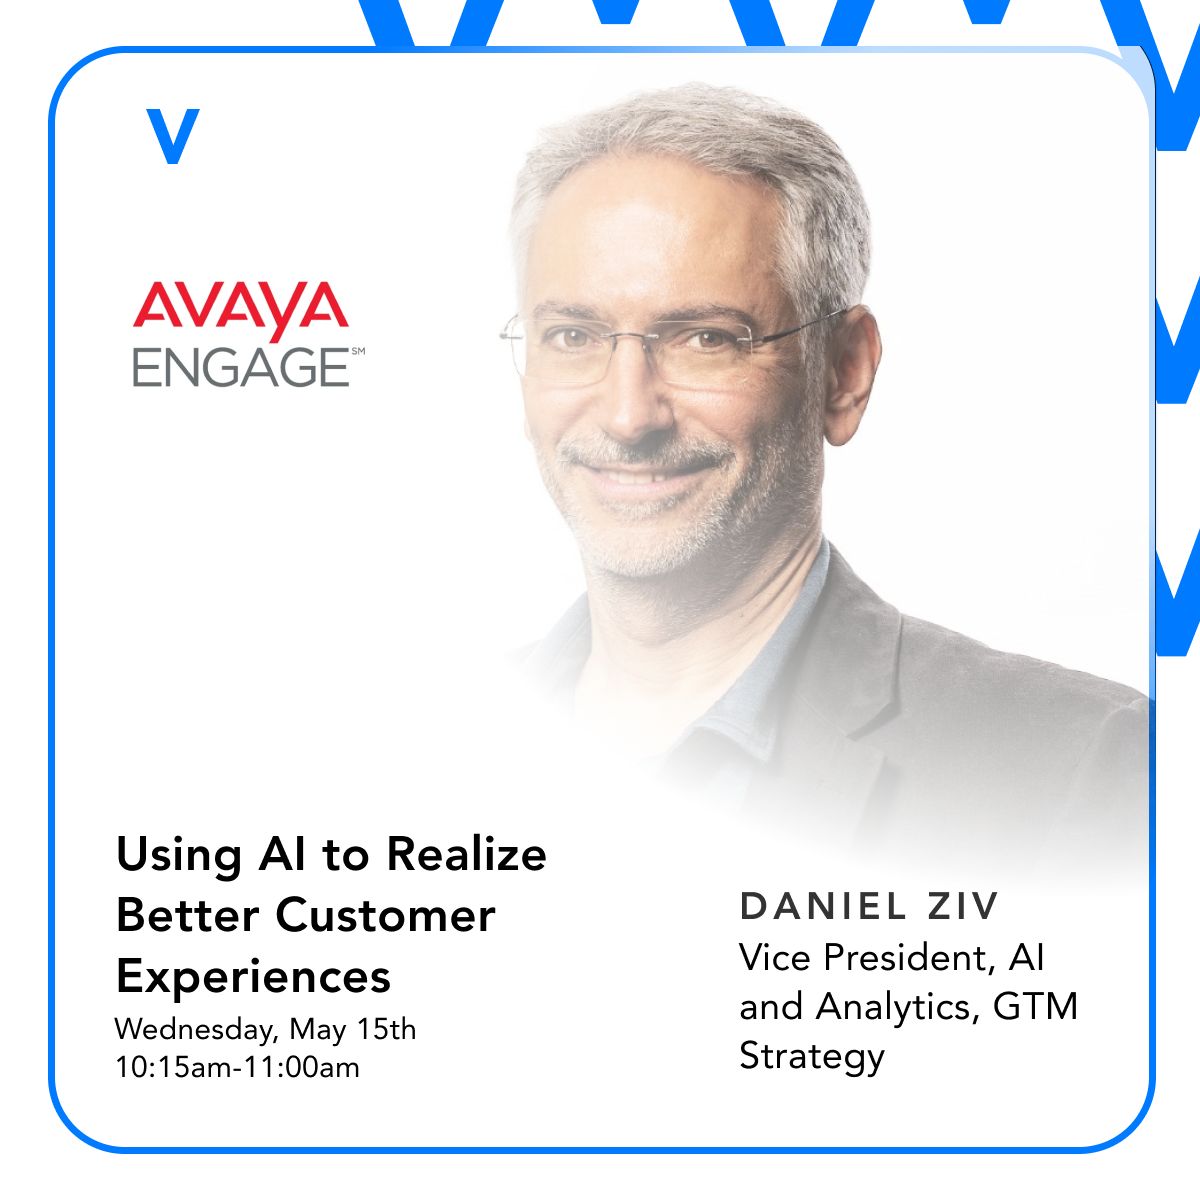 Just 2 hours until Daniel Ziv takes the stage at Avaya Engage! Join us at 10:15am for his session on 'Using AI to Realize Better Customer Experiences.' Don't miss out on this exploration of AI's impact on contact center expectations. See you there!